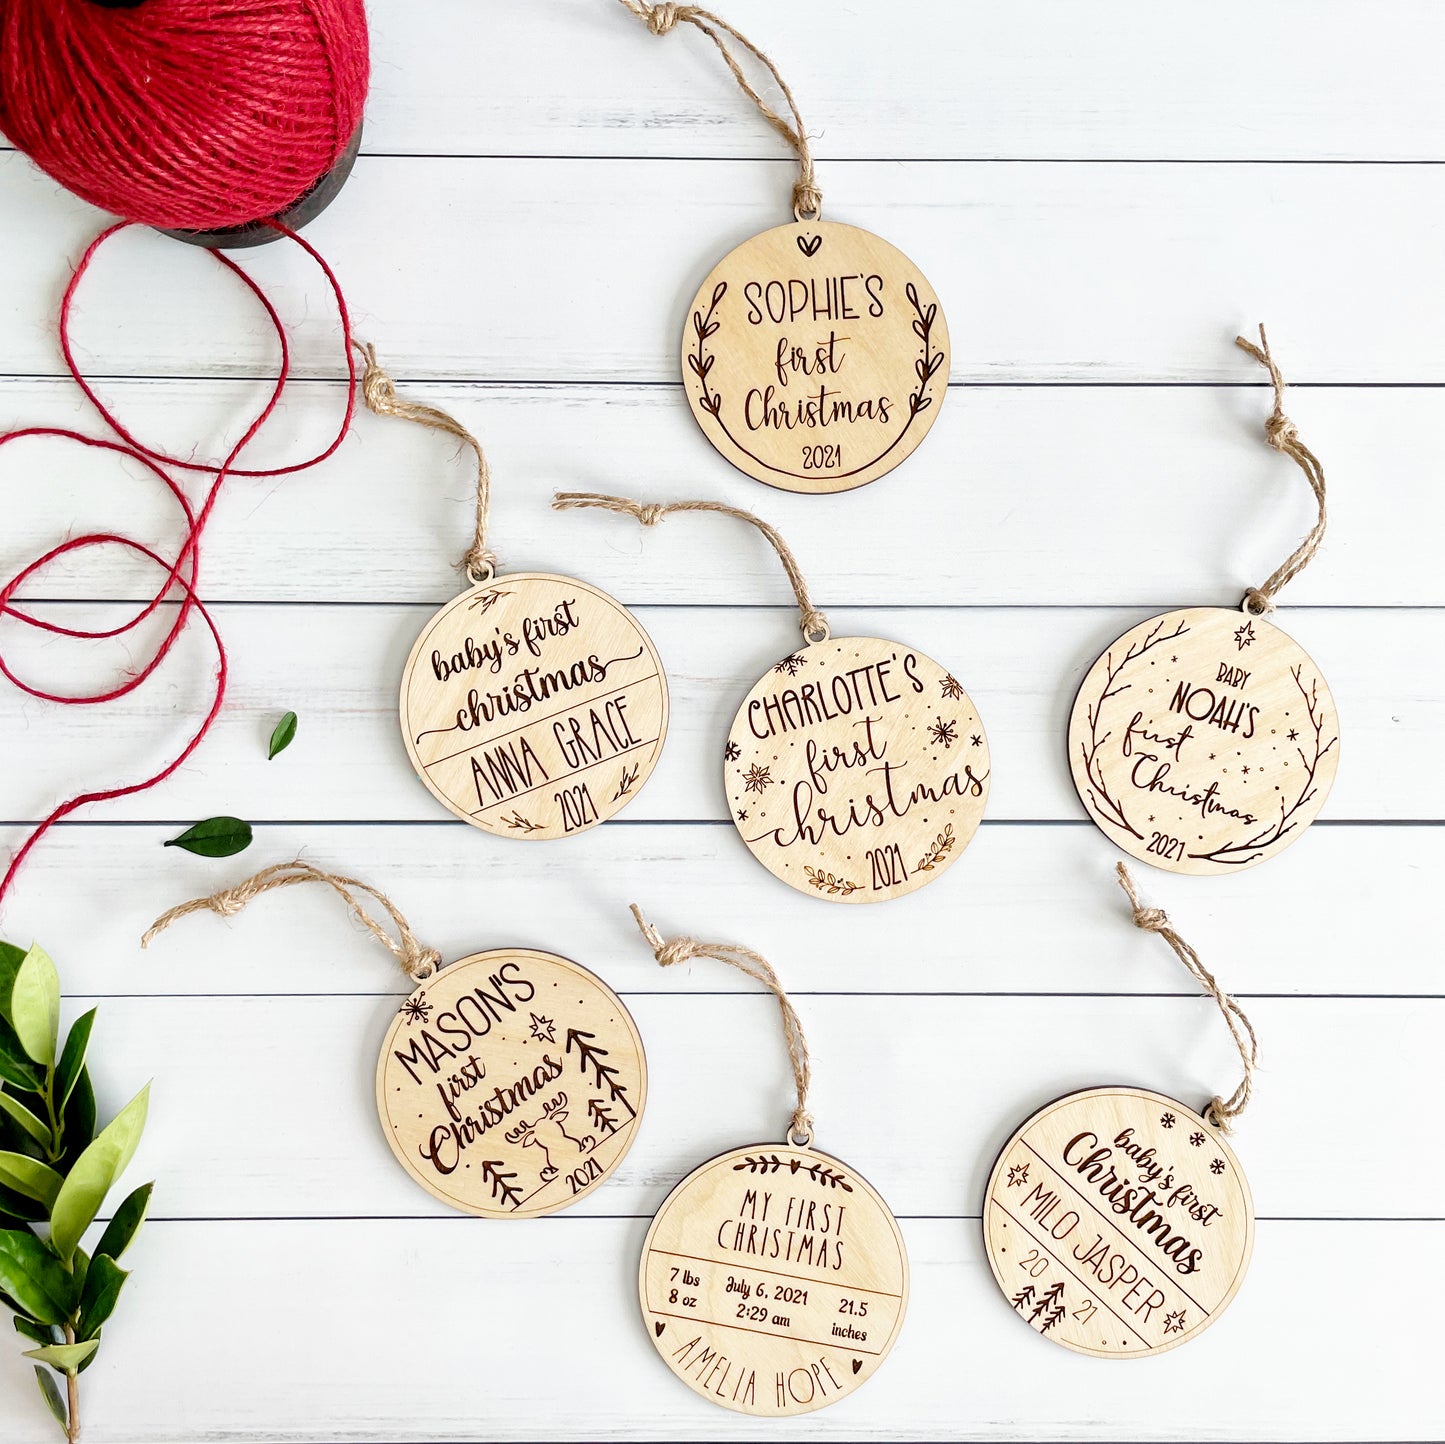 Baby's first Christmas engraved keepsake wooden ornament, customizable with first name and year